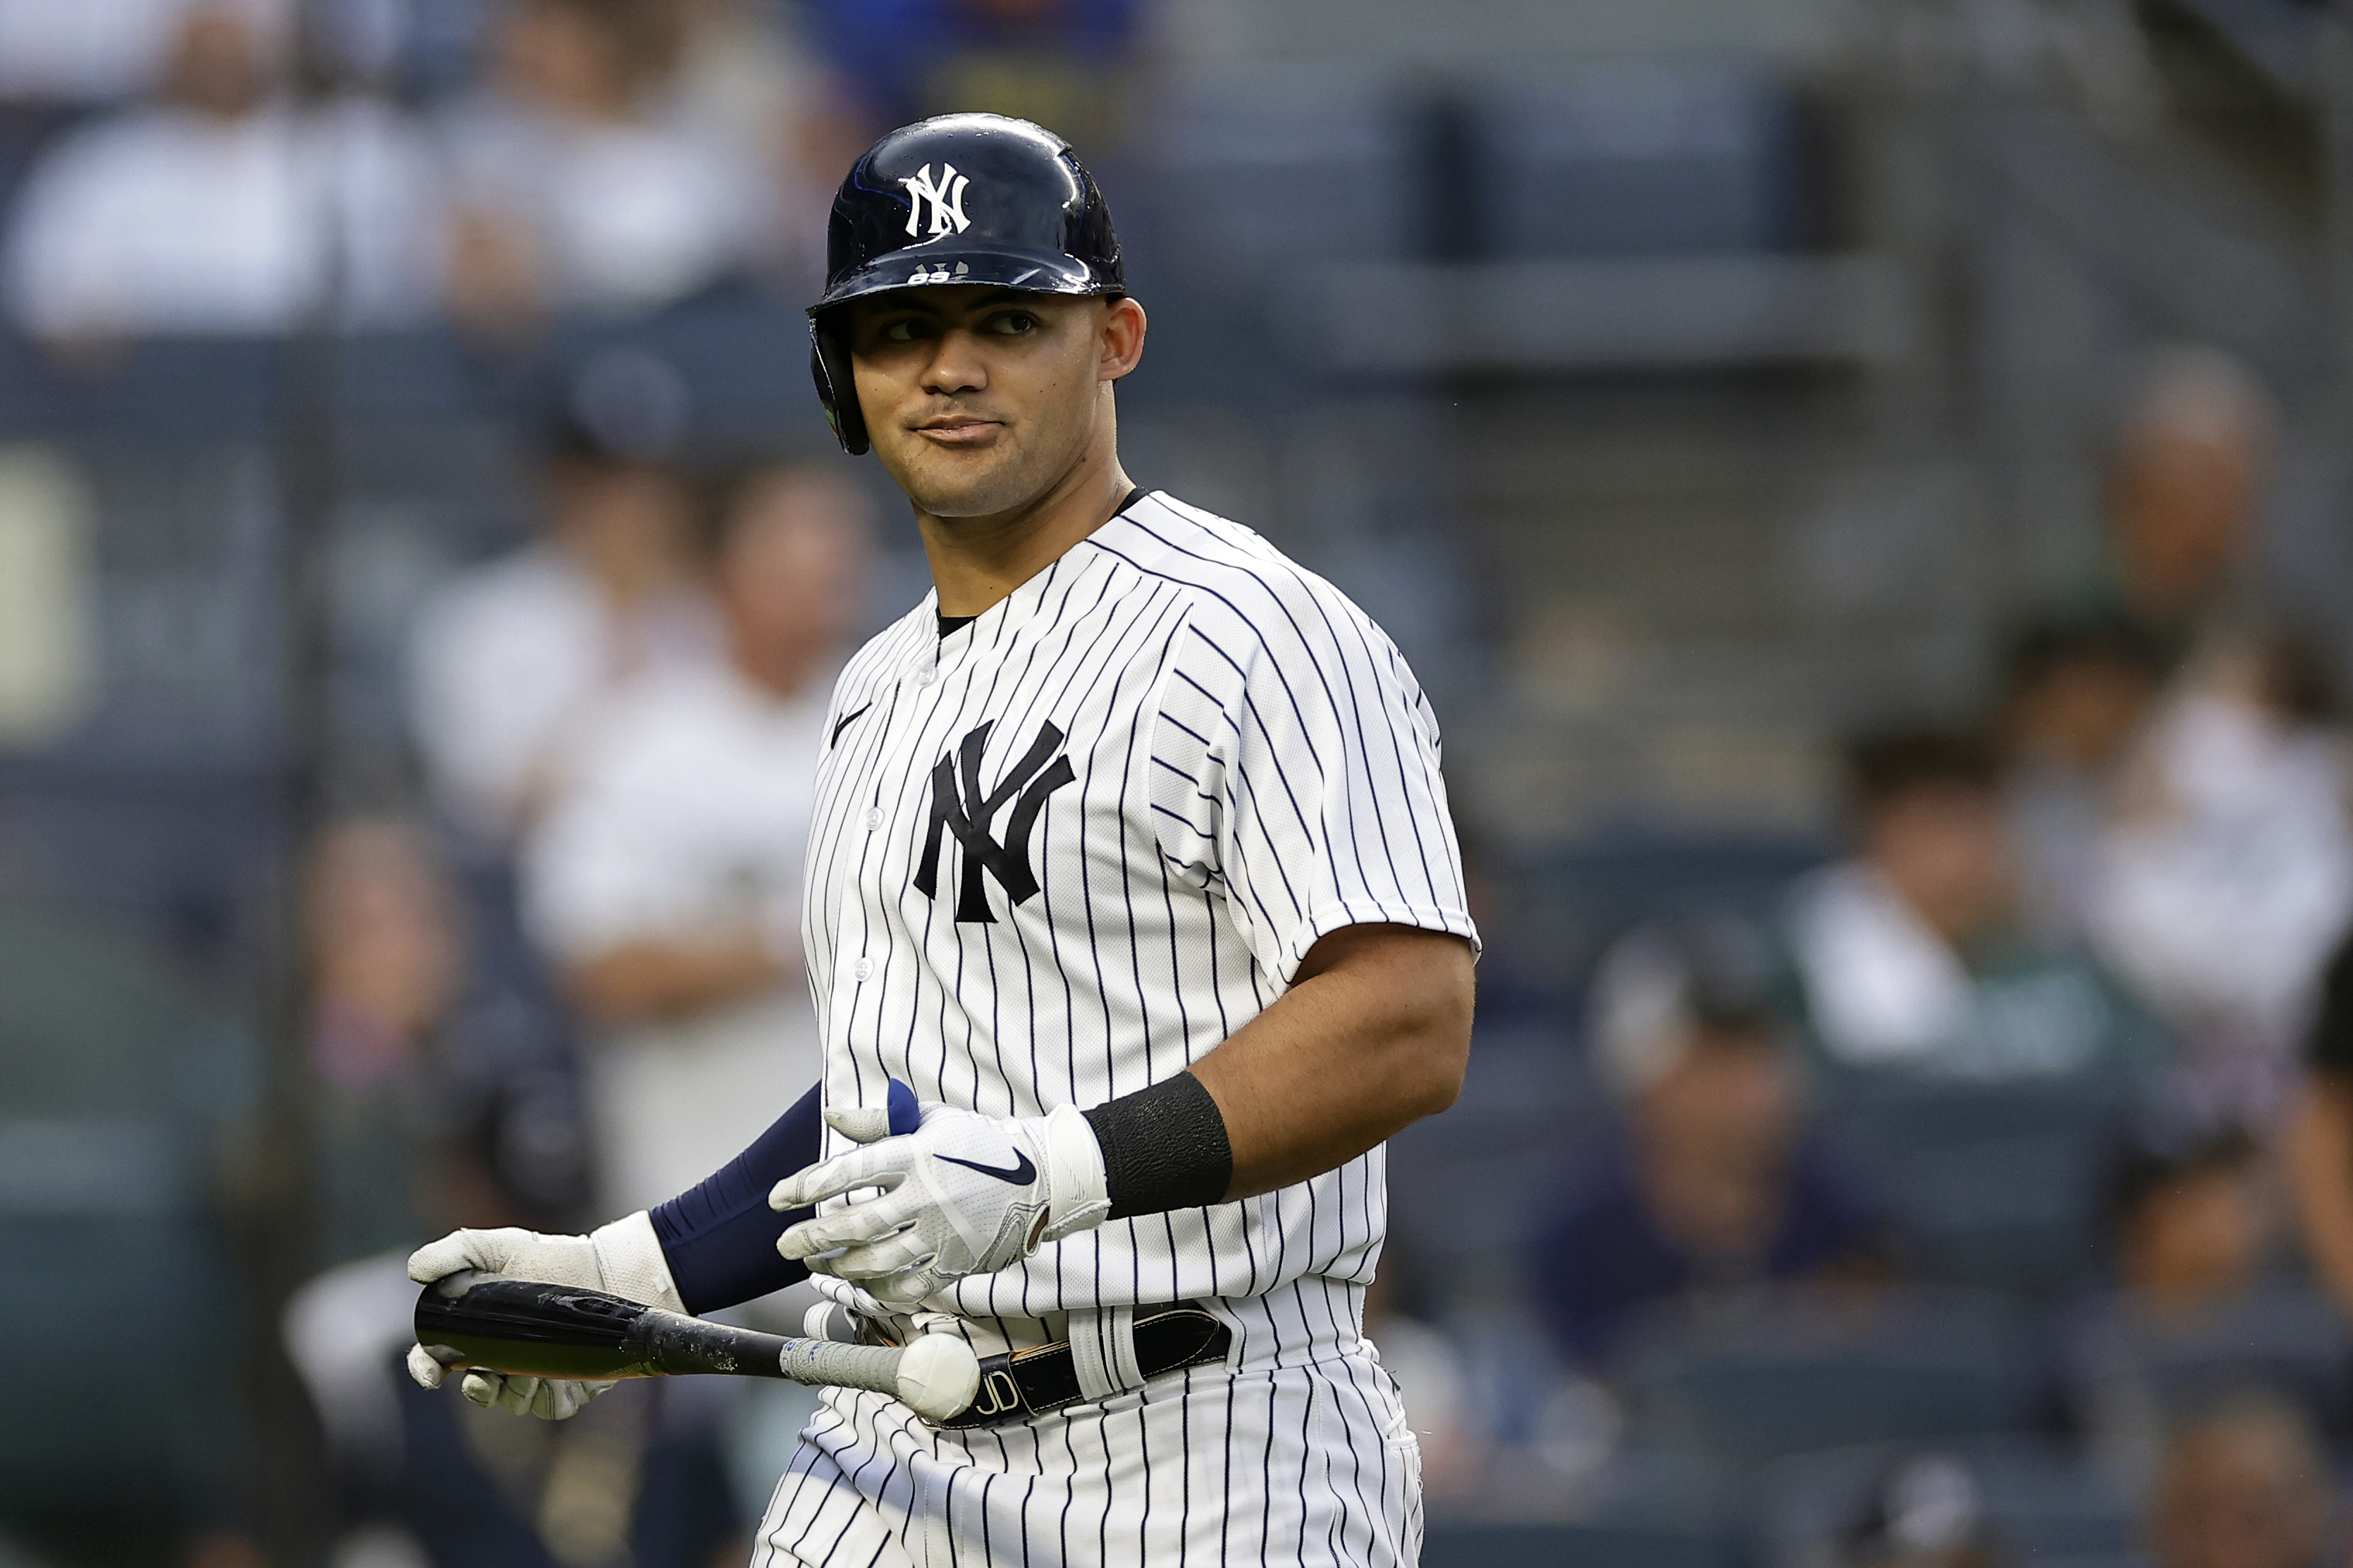 Yankees rookie outfielder Jasson Domínguez has torn elbow ligament